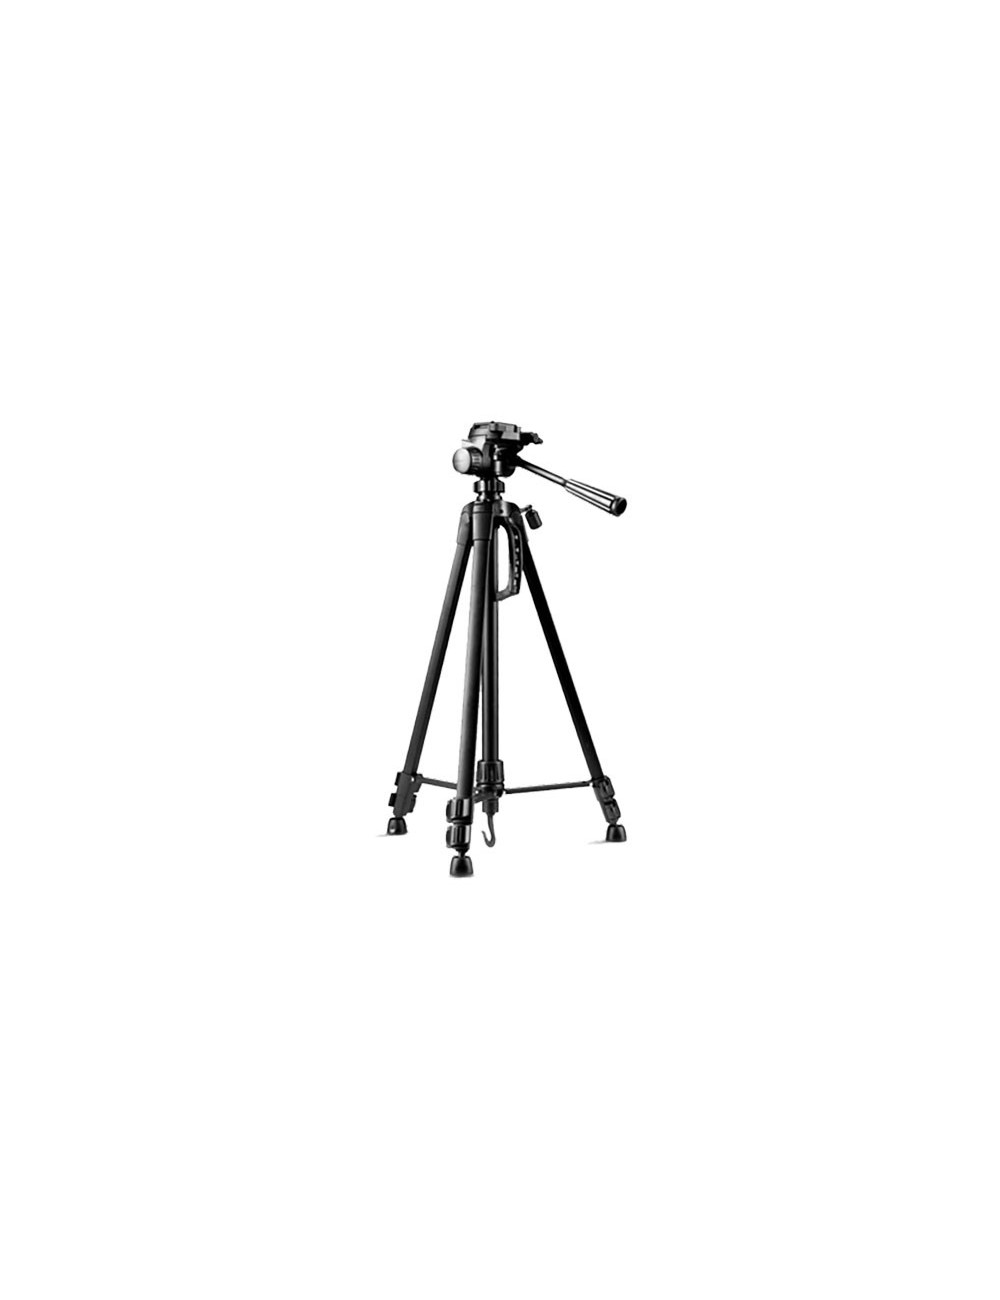 Extendable tripod for thermographic cameras